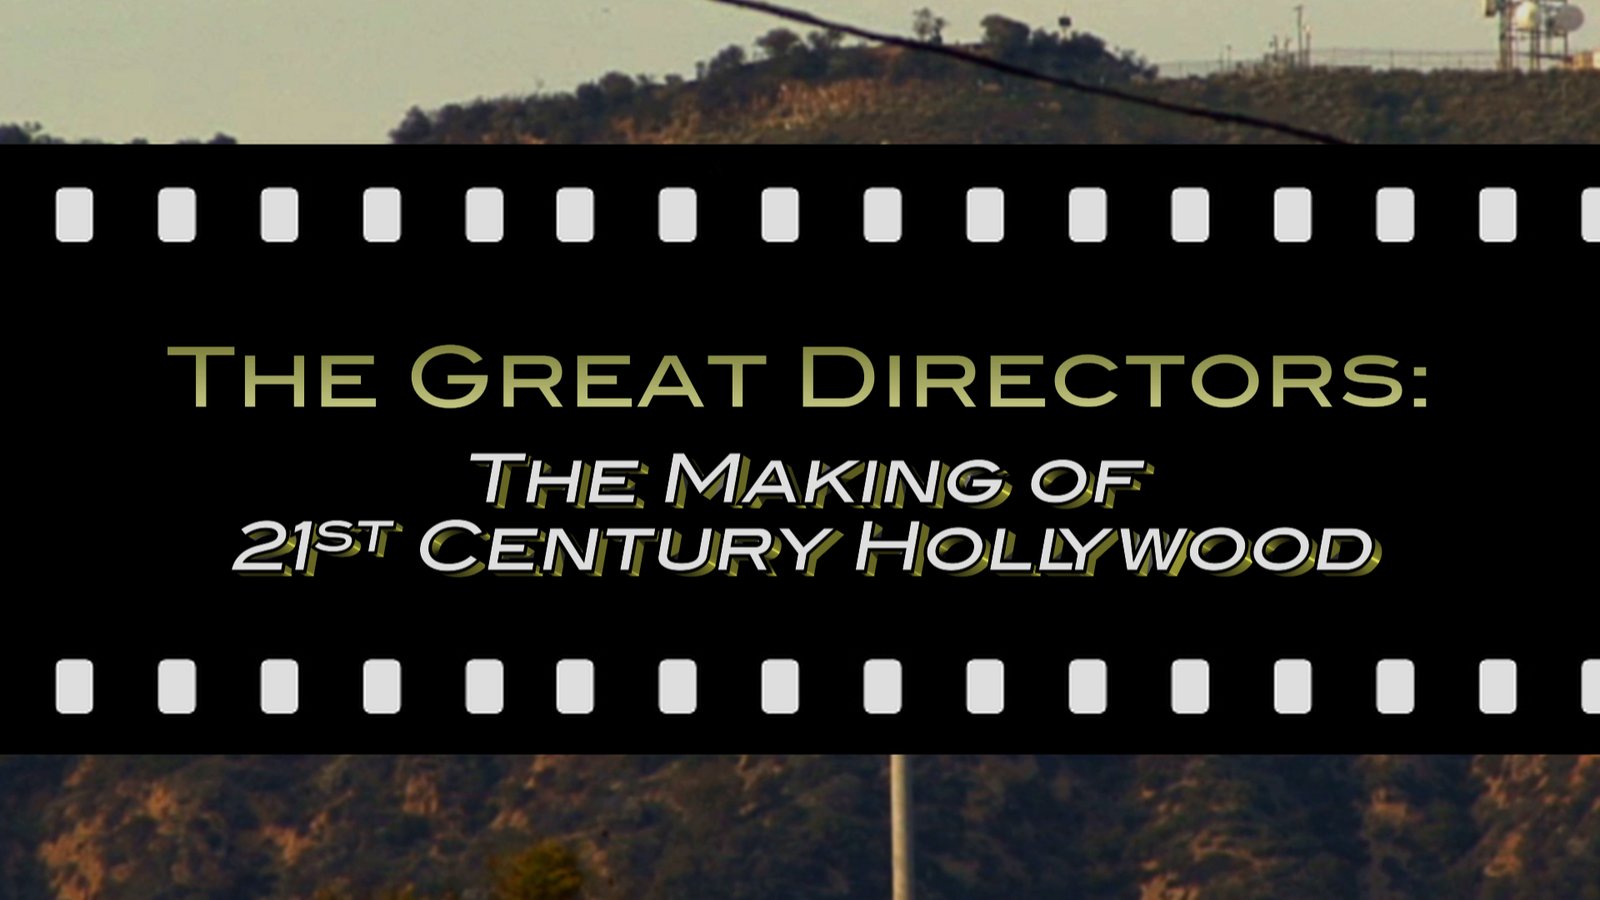 The Great Directors - The Making of 21st Century Hollywood